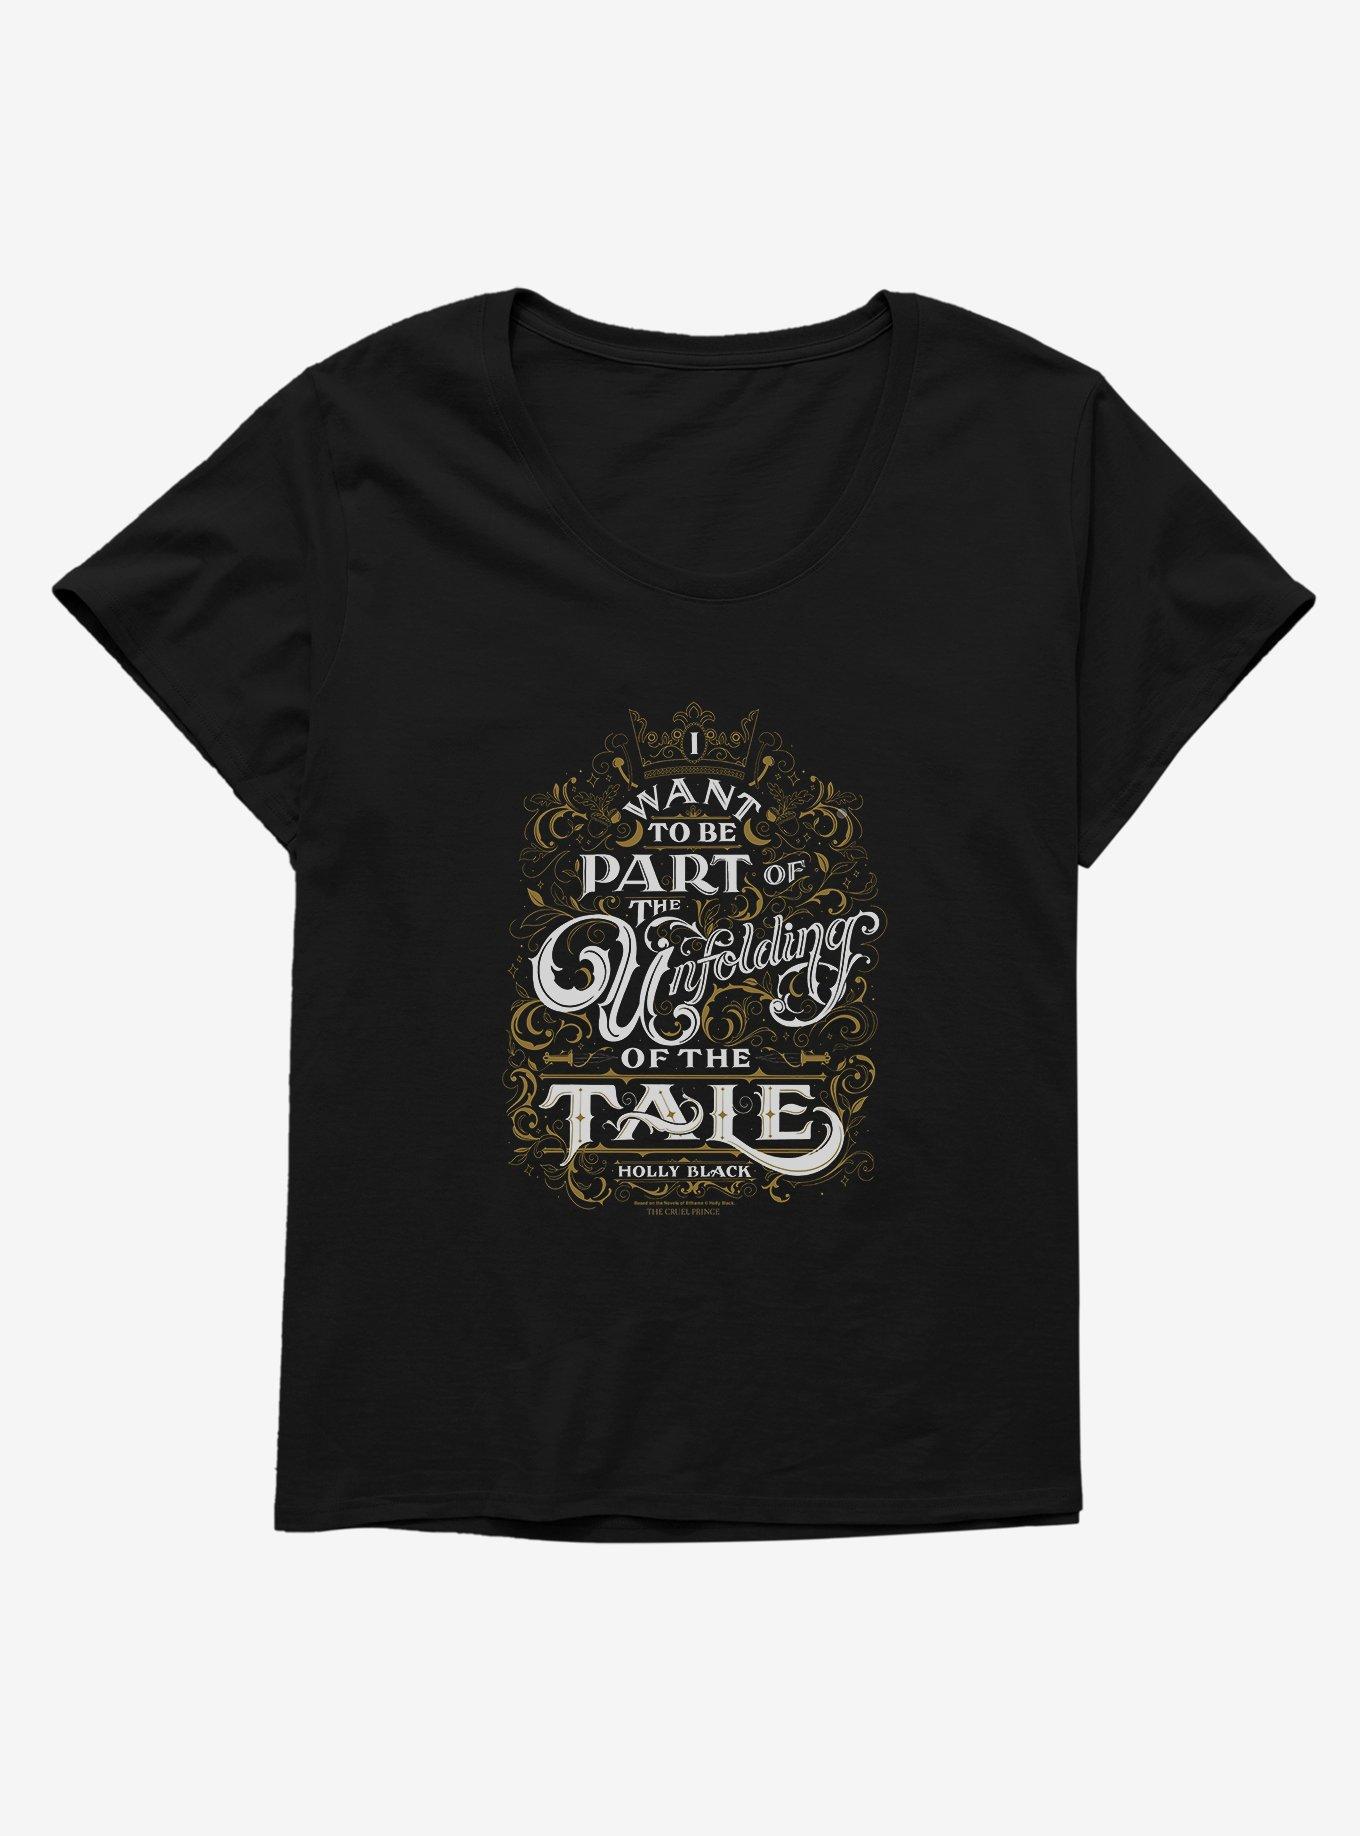 The Cruel Prince Sinister Enchantment Collection: Unfolding Of Tale Girls T-Shirt Plus